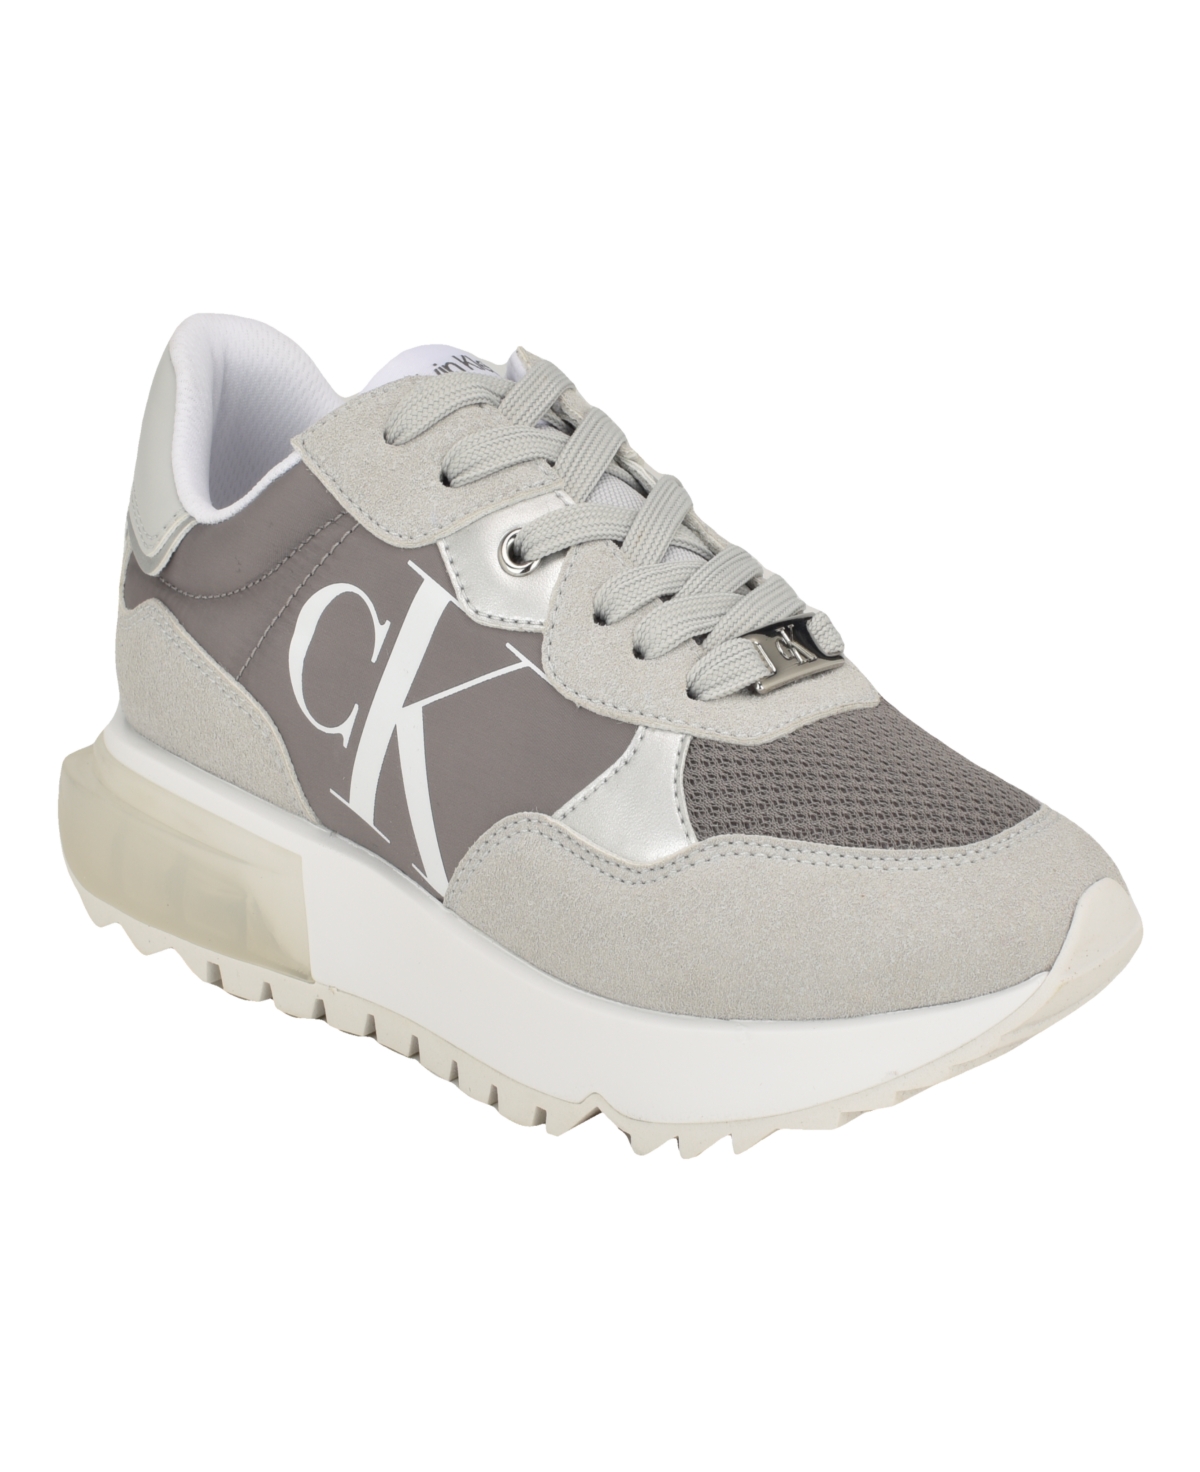 Calvin Klein Women's Magalee Casual Logo Lace-Up Sneakers - Light Gray- Manmade, Textile